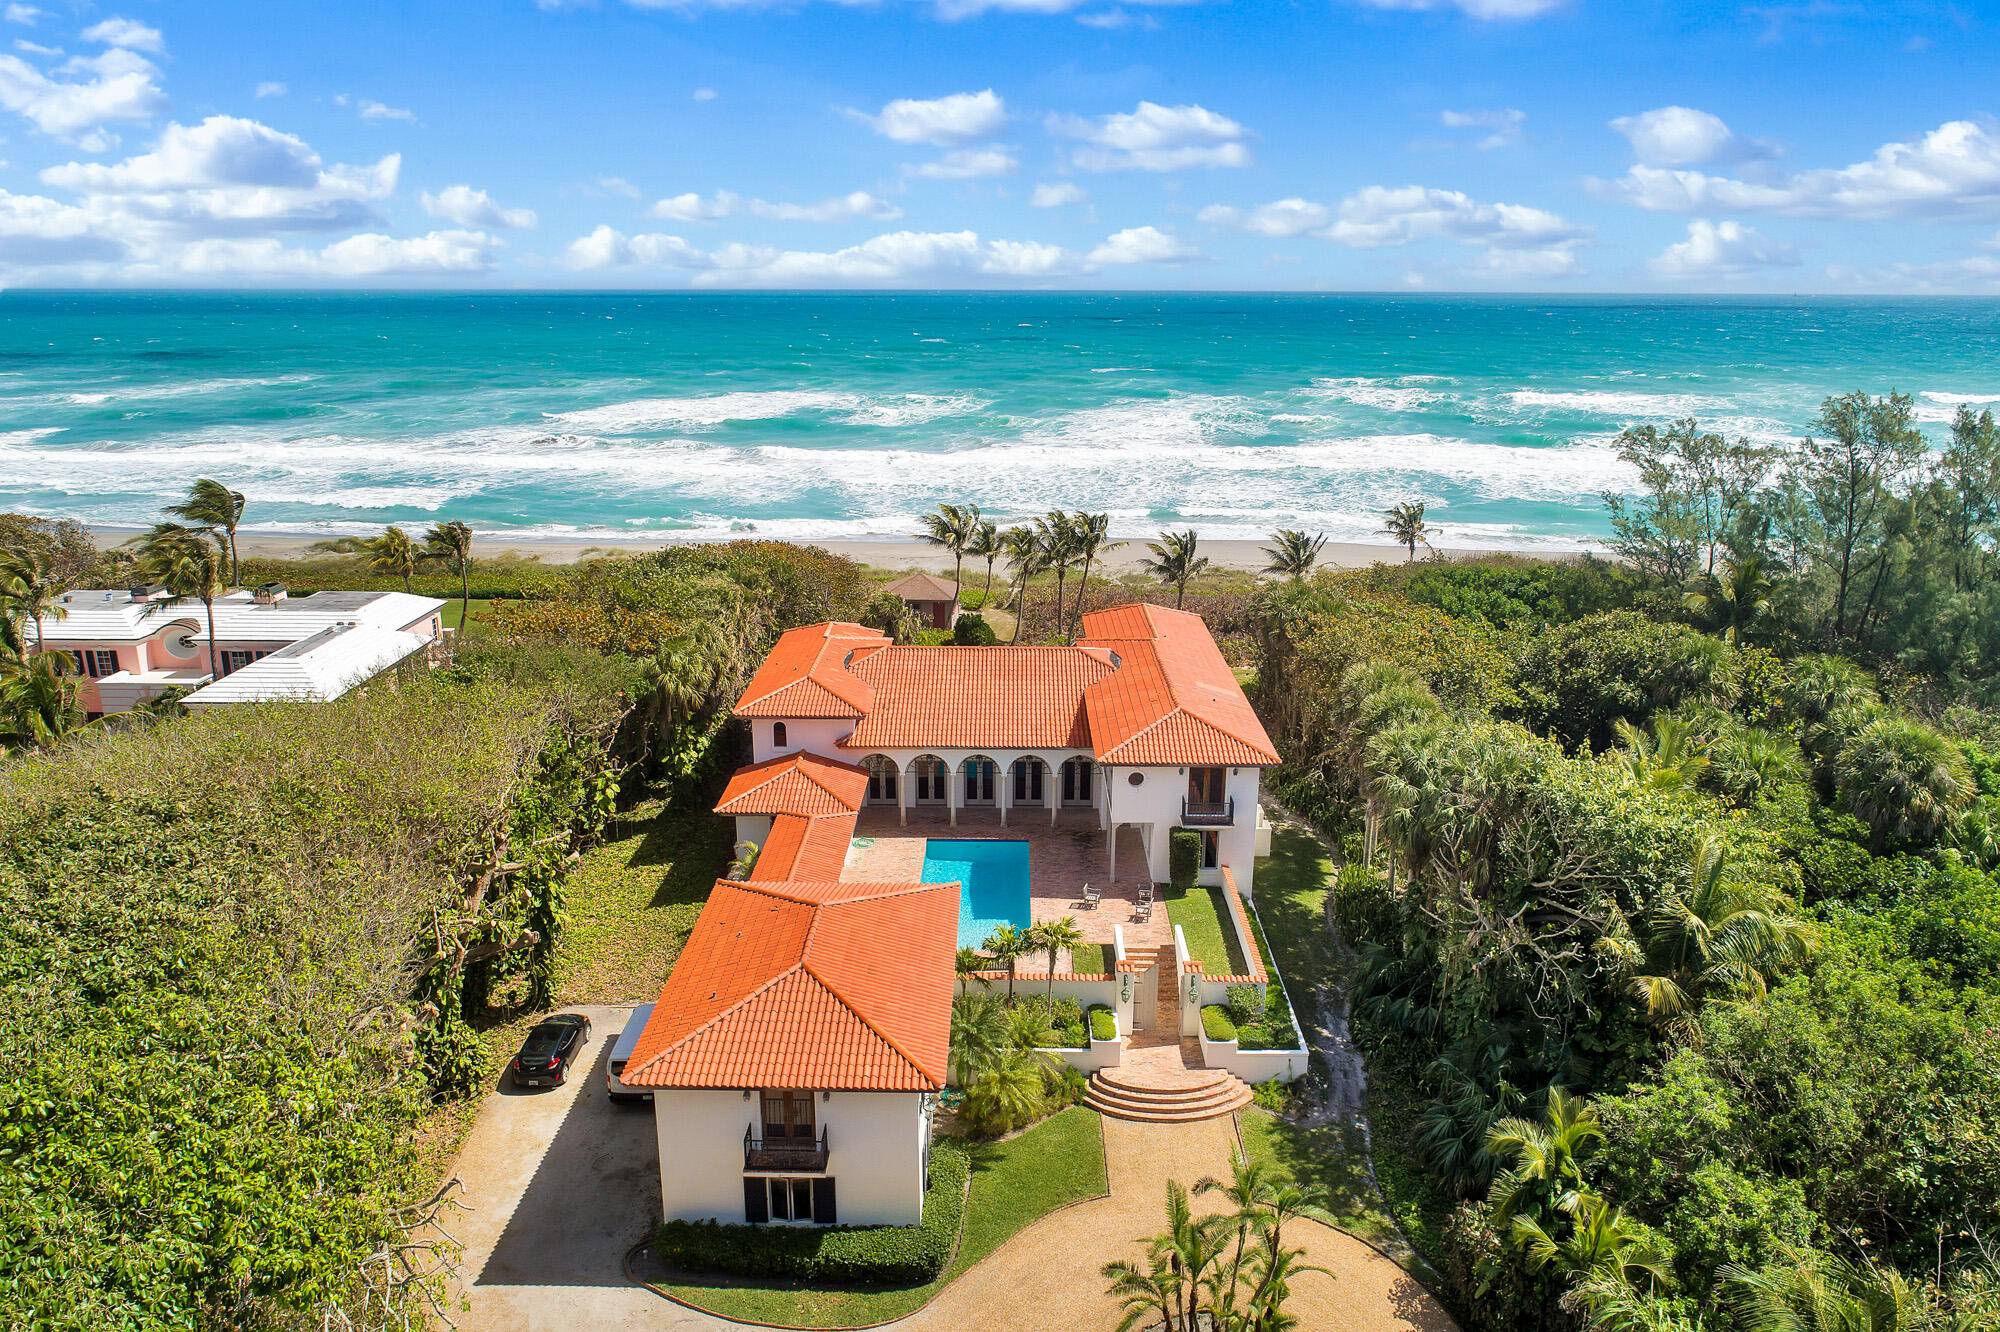 This spacious direct oceanfront home features spectacular ocean views, secluded private beach, freshly painted and updated house with 4 bedroom suites in the main house and a 2 bedroom guesthouse, ...